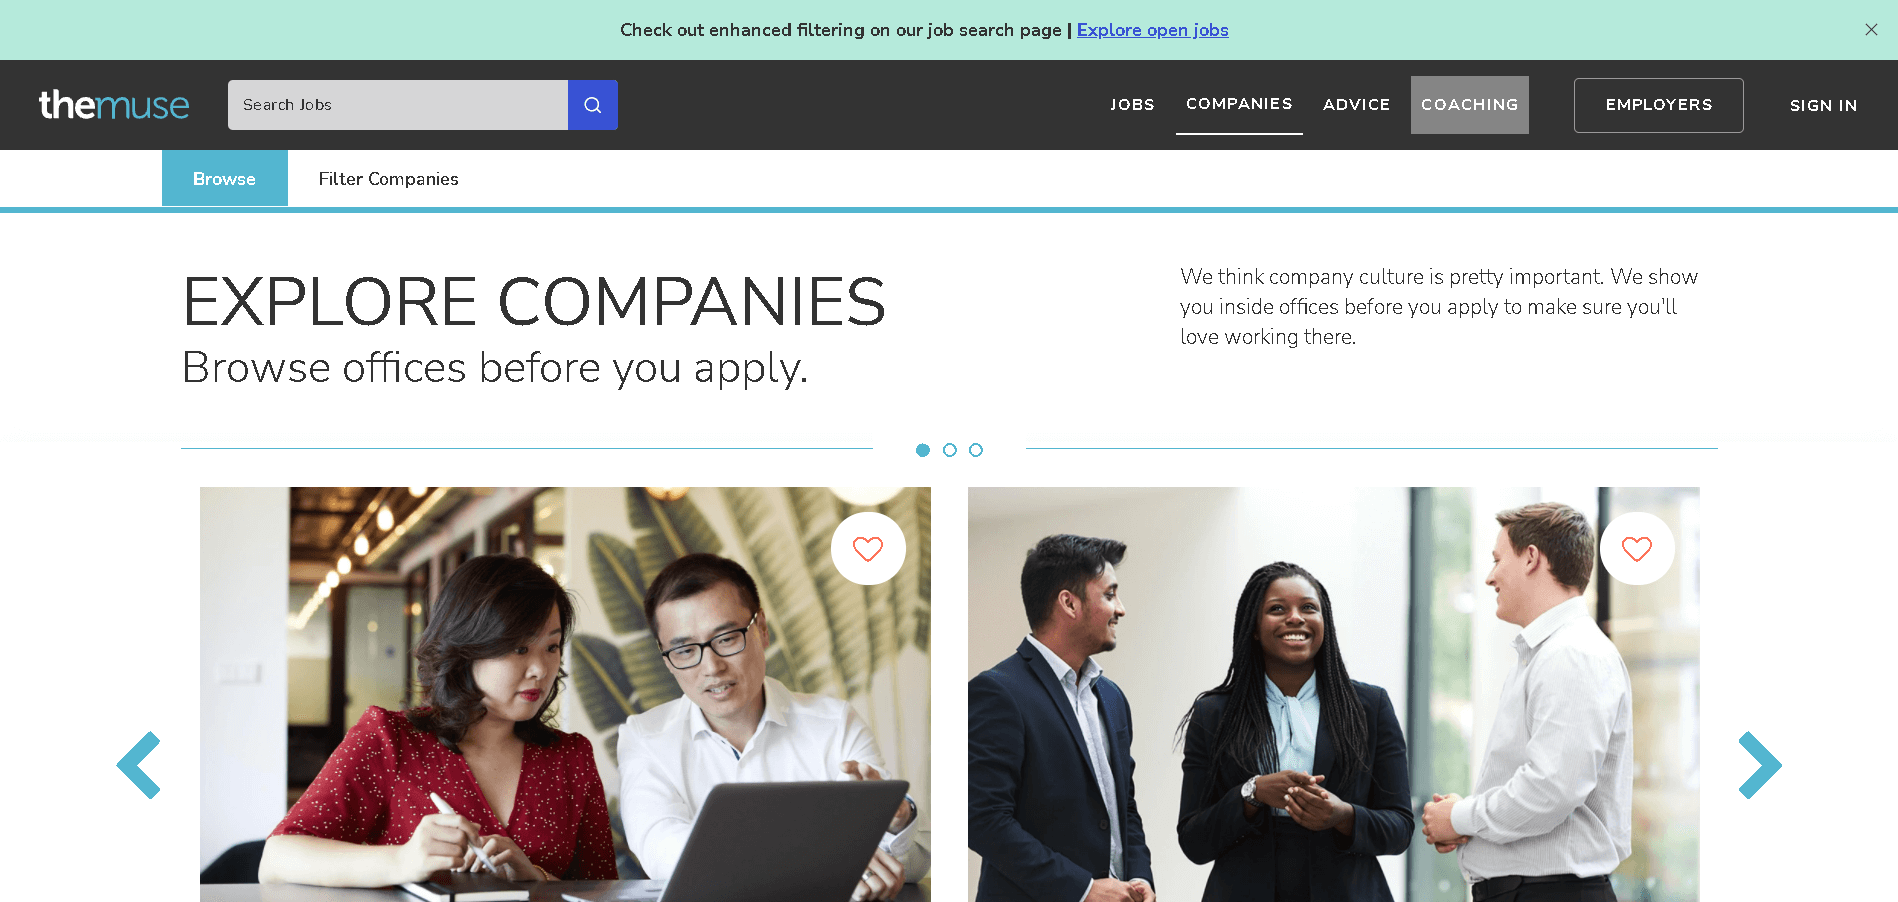 website navigation guide the muse companies tab example